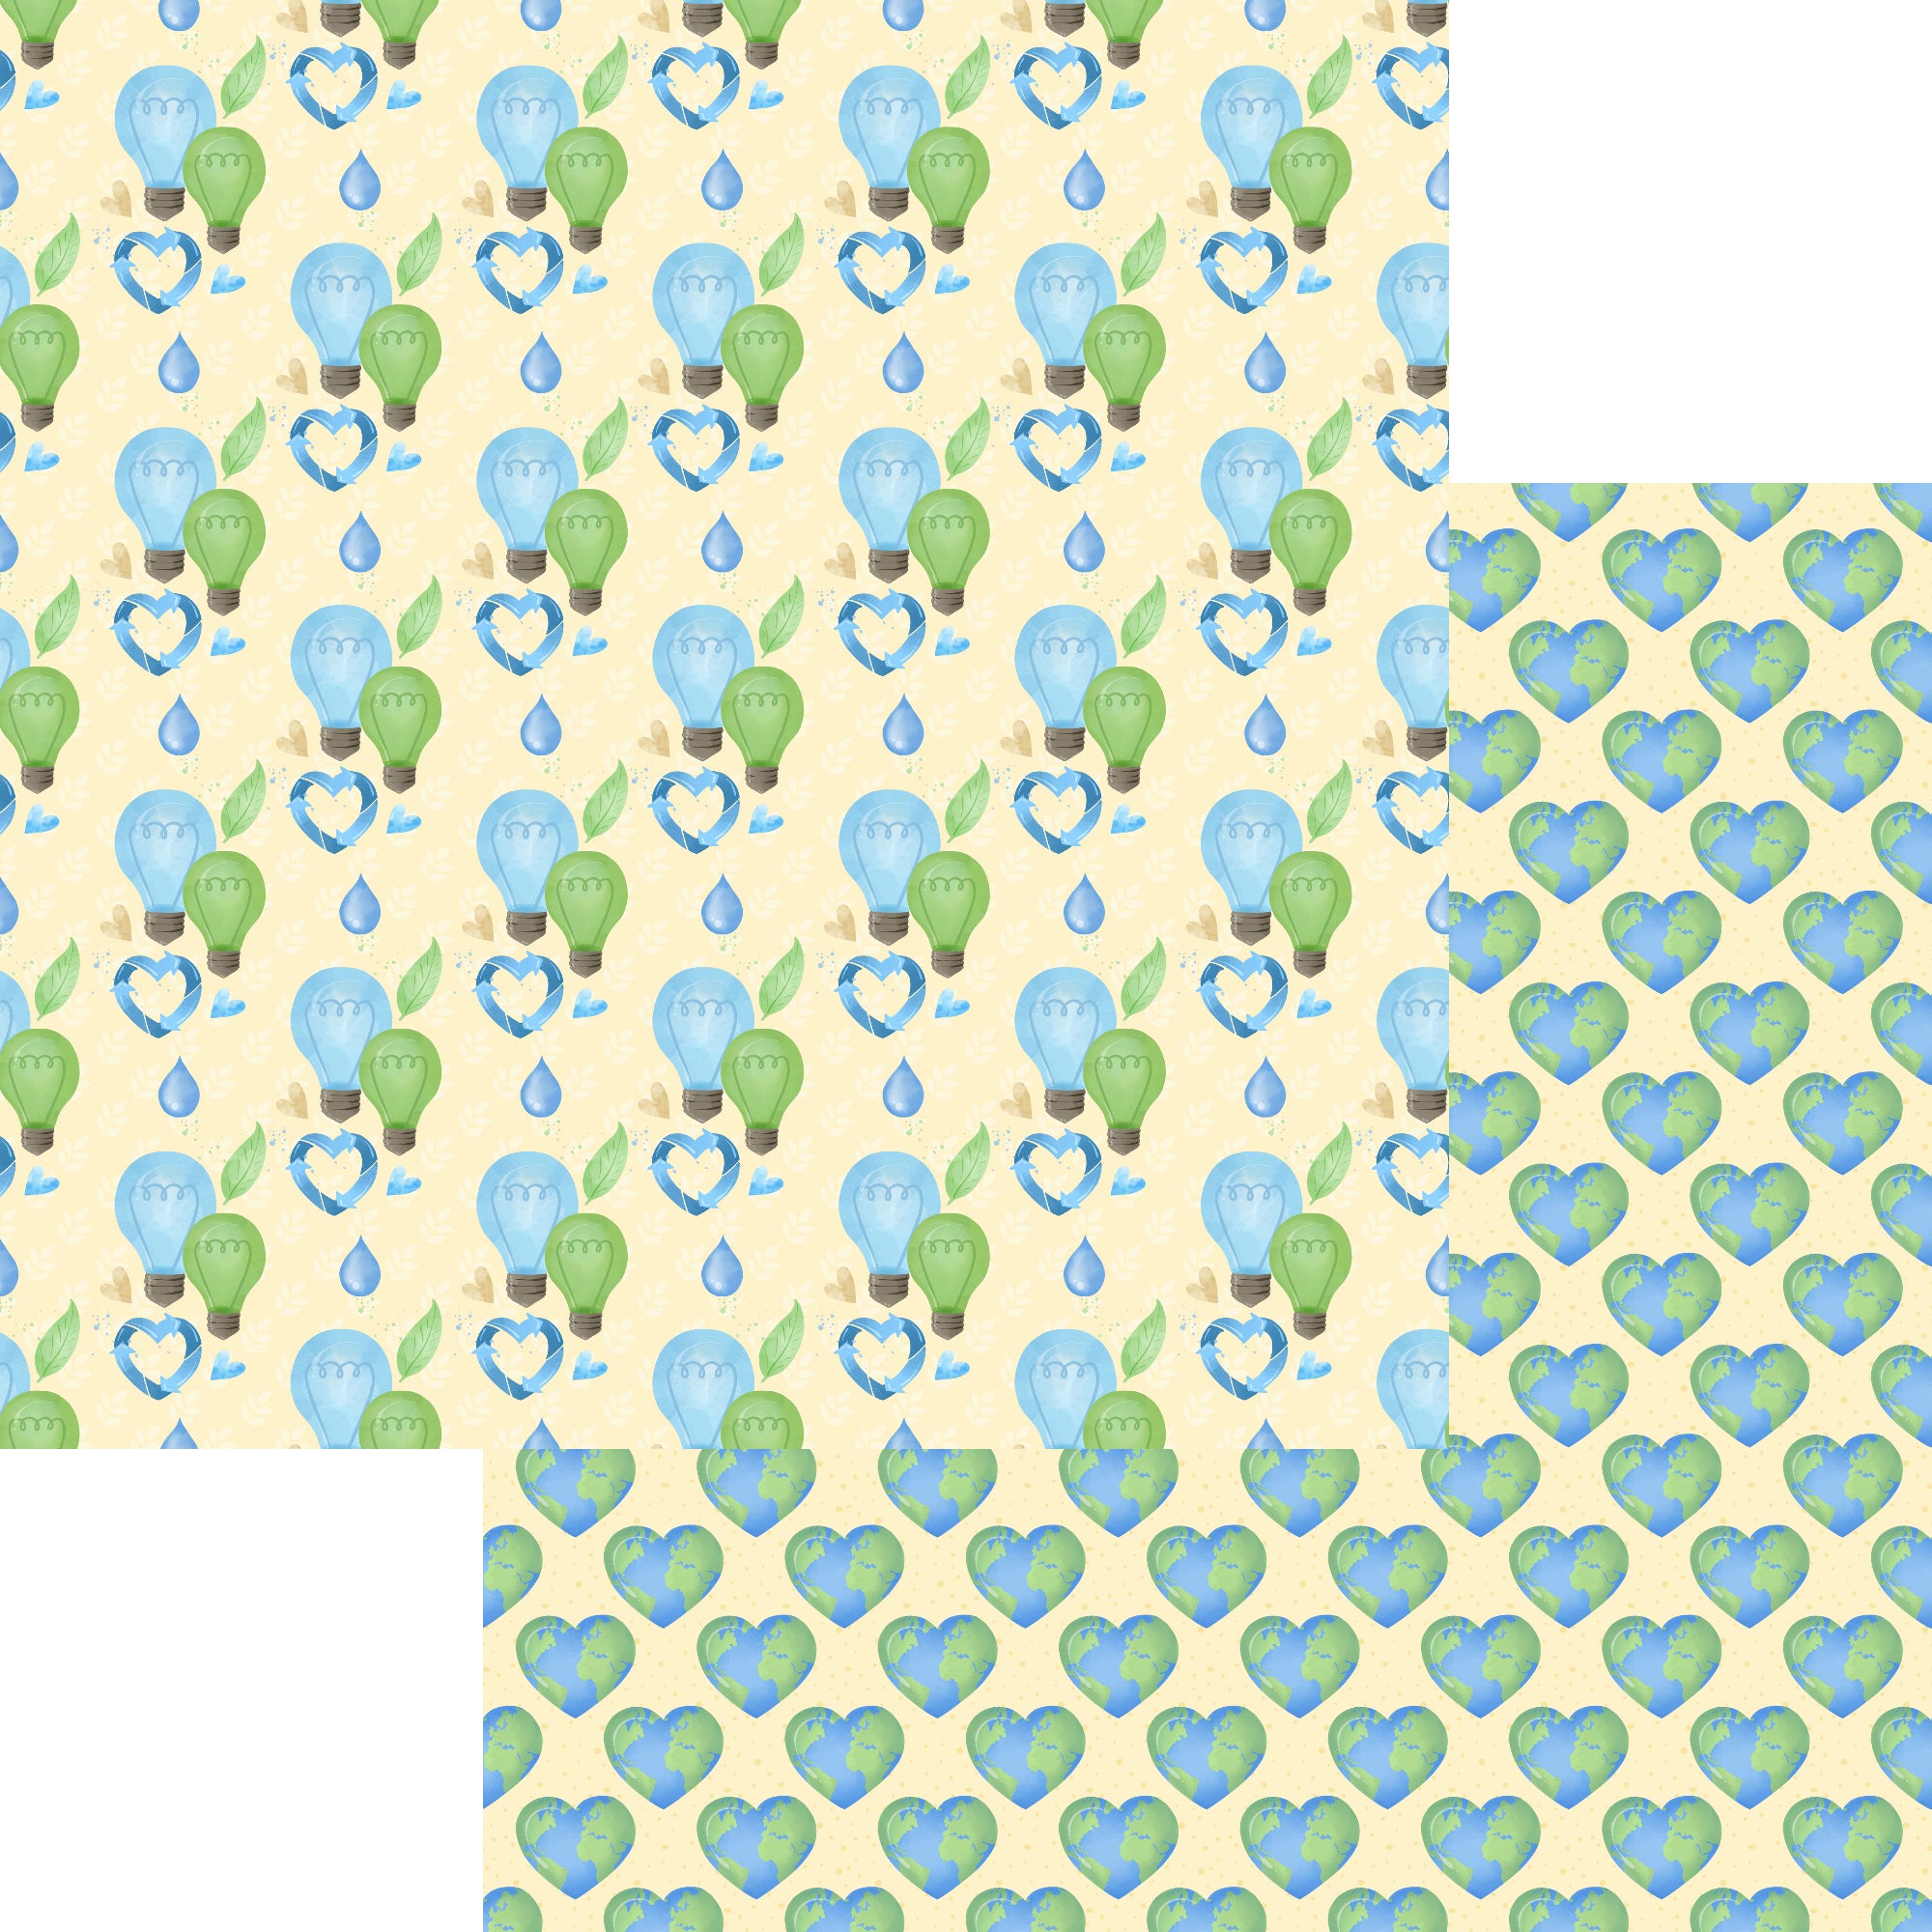 Earth Day Collection Earth Day Love 12 x 12 Double-Sided Scrapbook Paper by SSC Designs